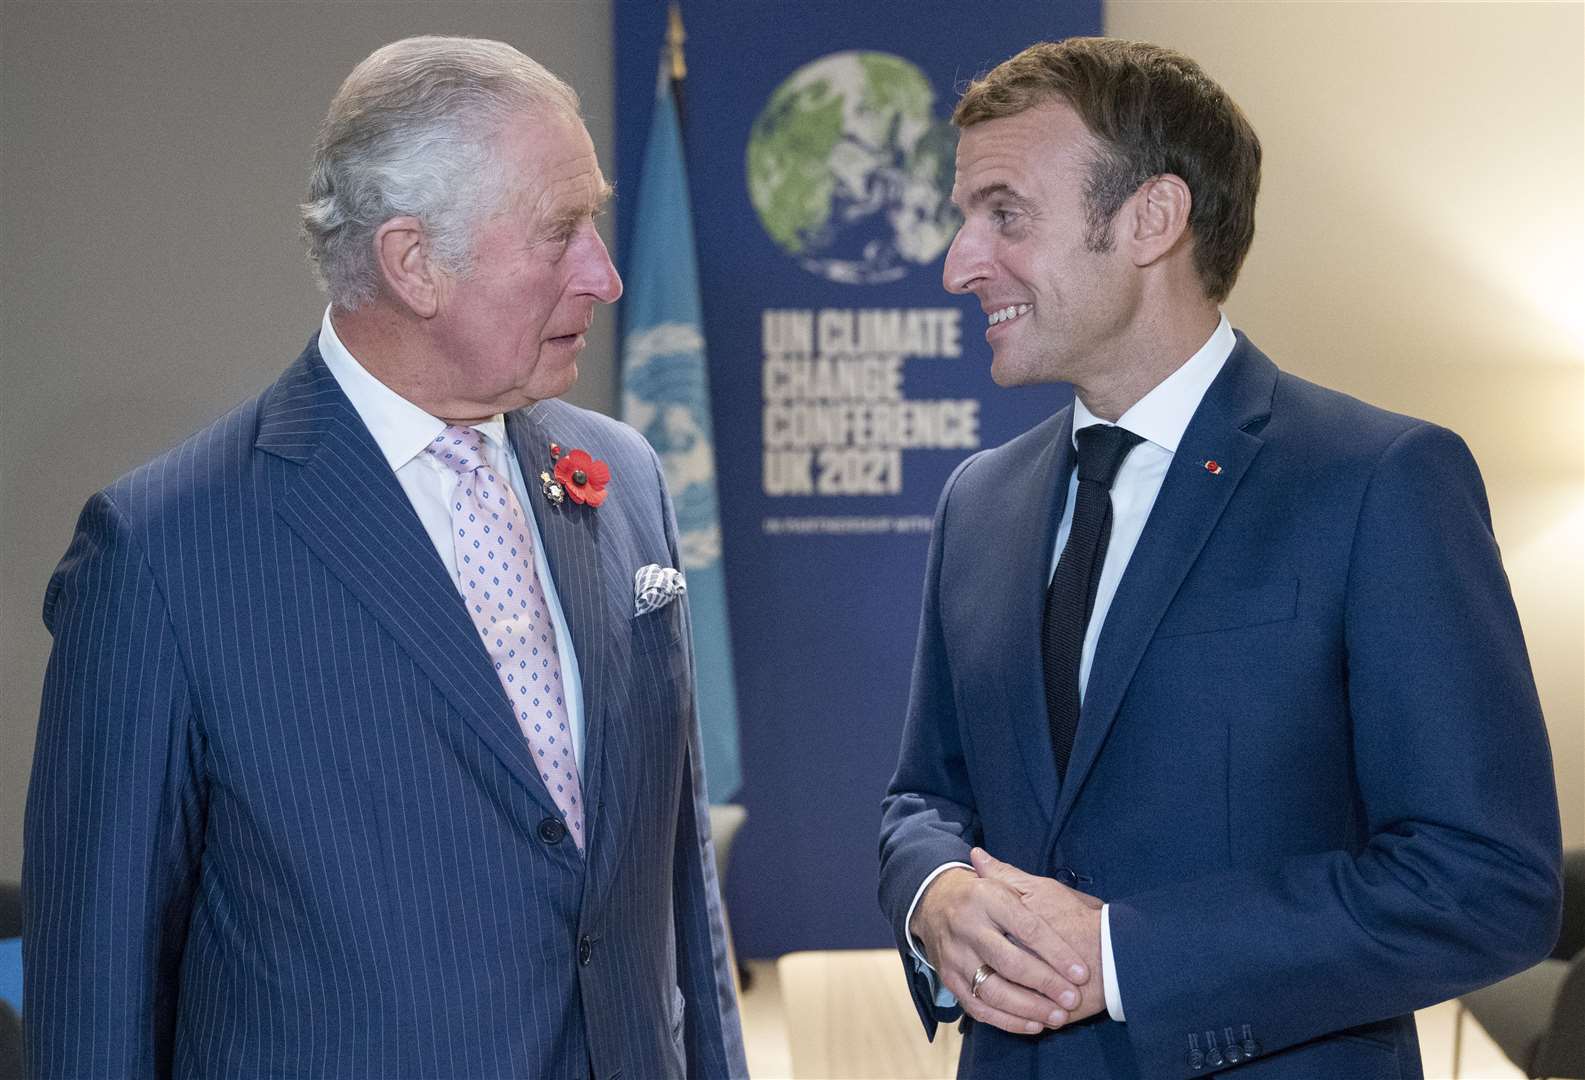 Charles with France’s President Emmanuel Macron during the Cop26 climate change summit (Jane Barlow/PA)